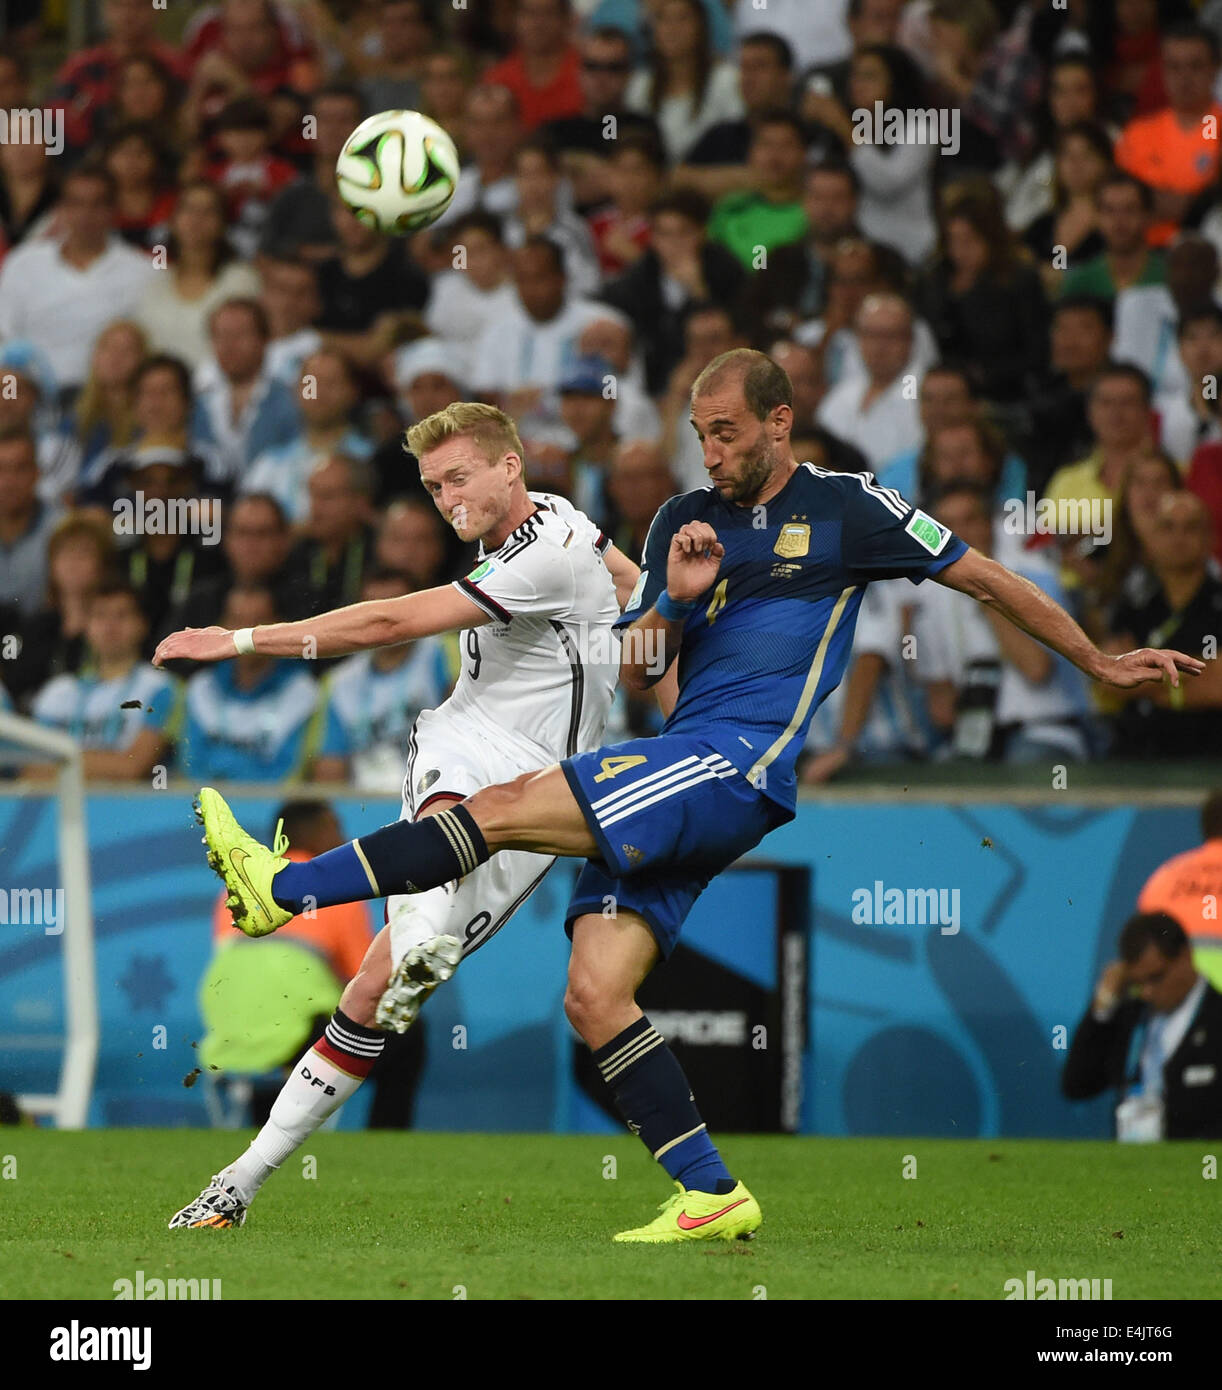 Rio De Janeiro, Brazil. 13th July, 2014. Argentina's Pablo Zabaleta (R) vies with Germany's Andre Schuerrle during the final match between Germany and Argentina of 2014 FIFA World Cup at the Estadio do Maracana Stadium in Rio de Janeiro, Brazil, on July 13, 2014. Credit:  Liu Dawei/Xinhua/Alamy Live News Stock Photo